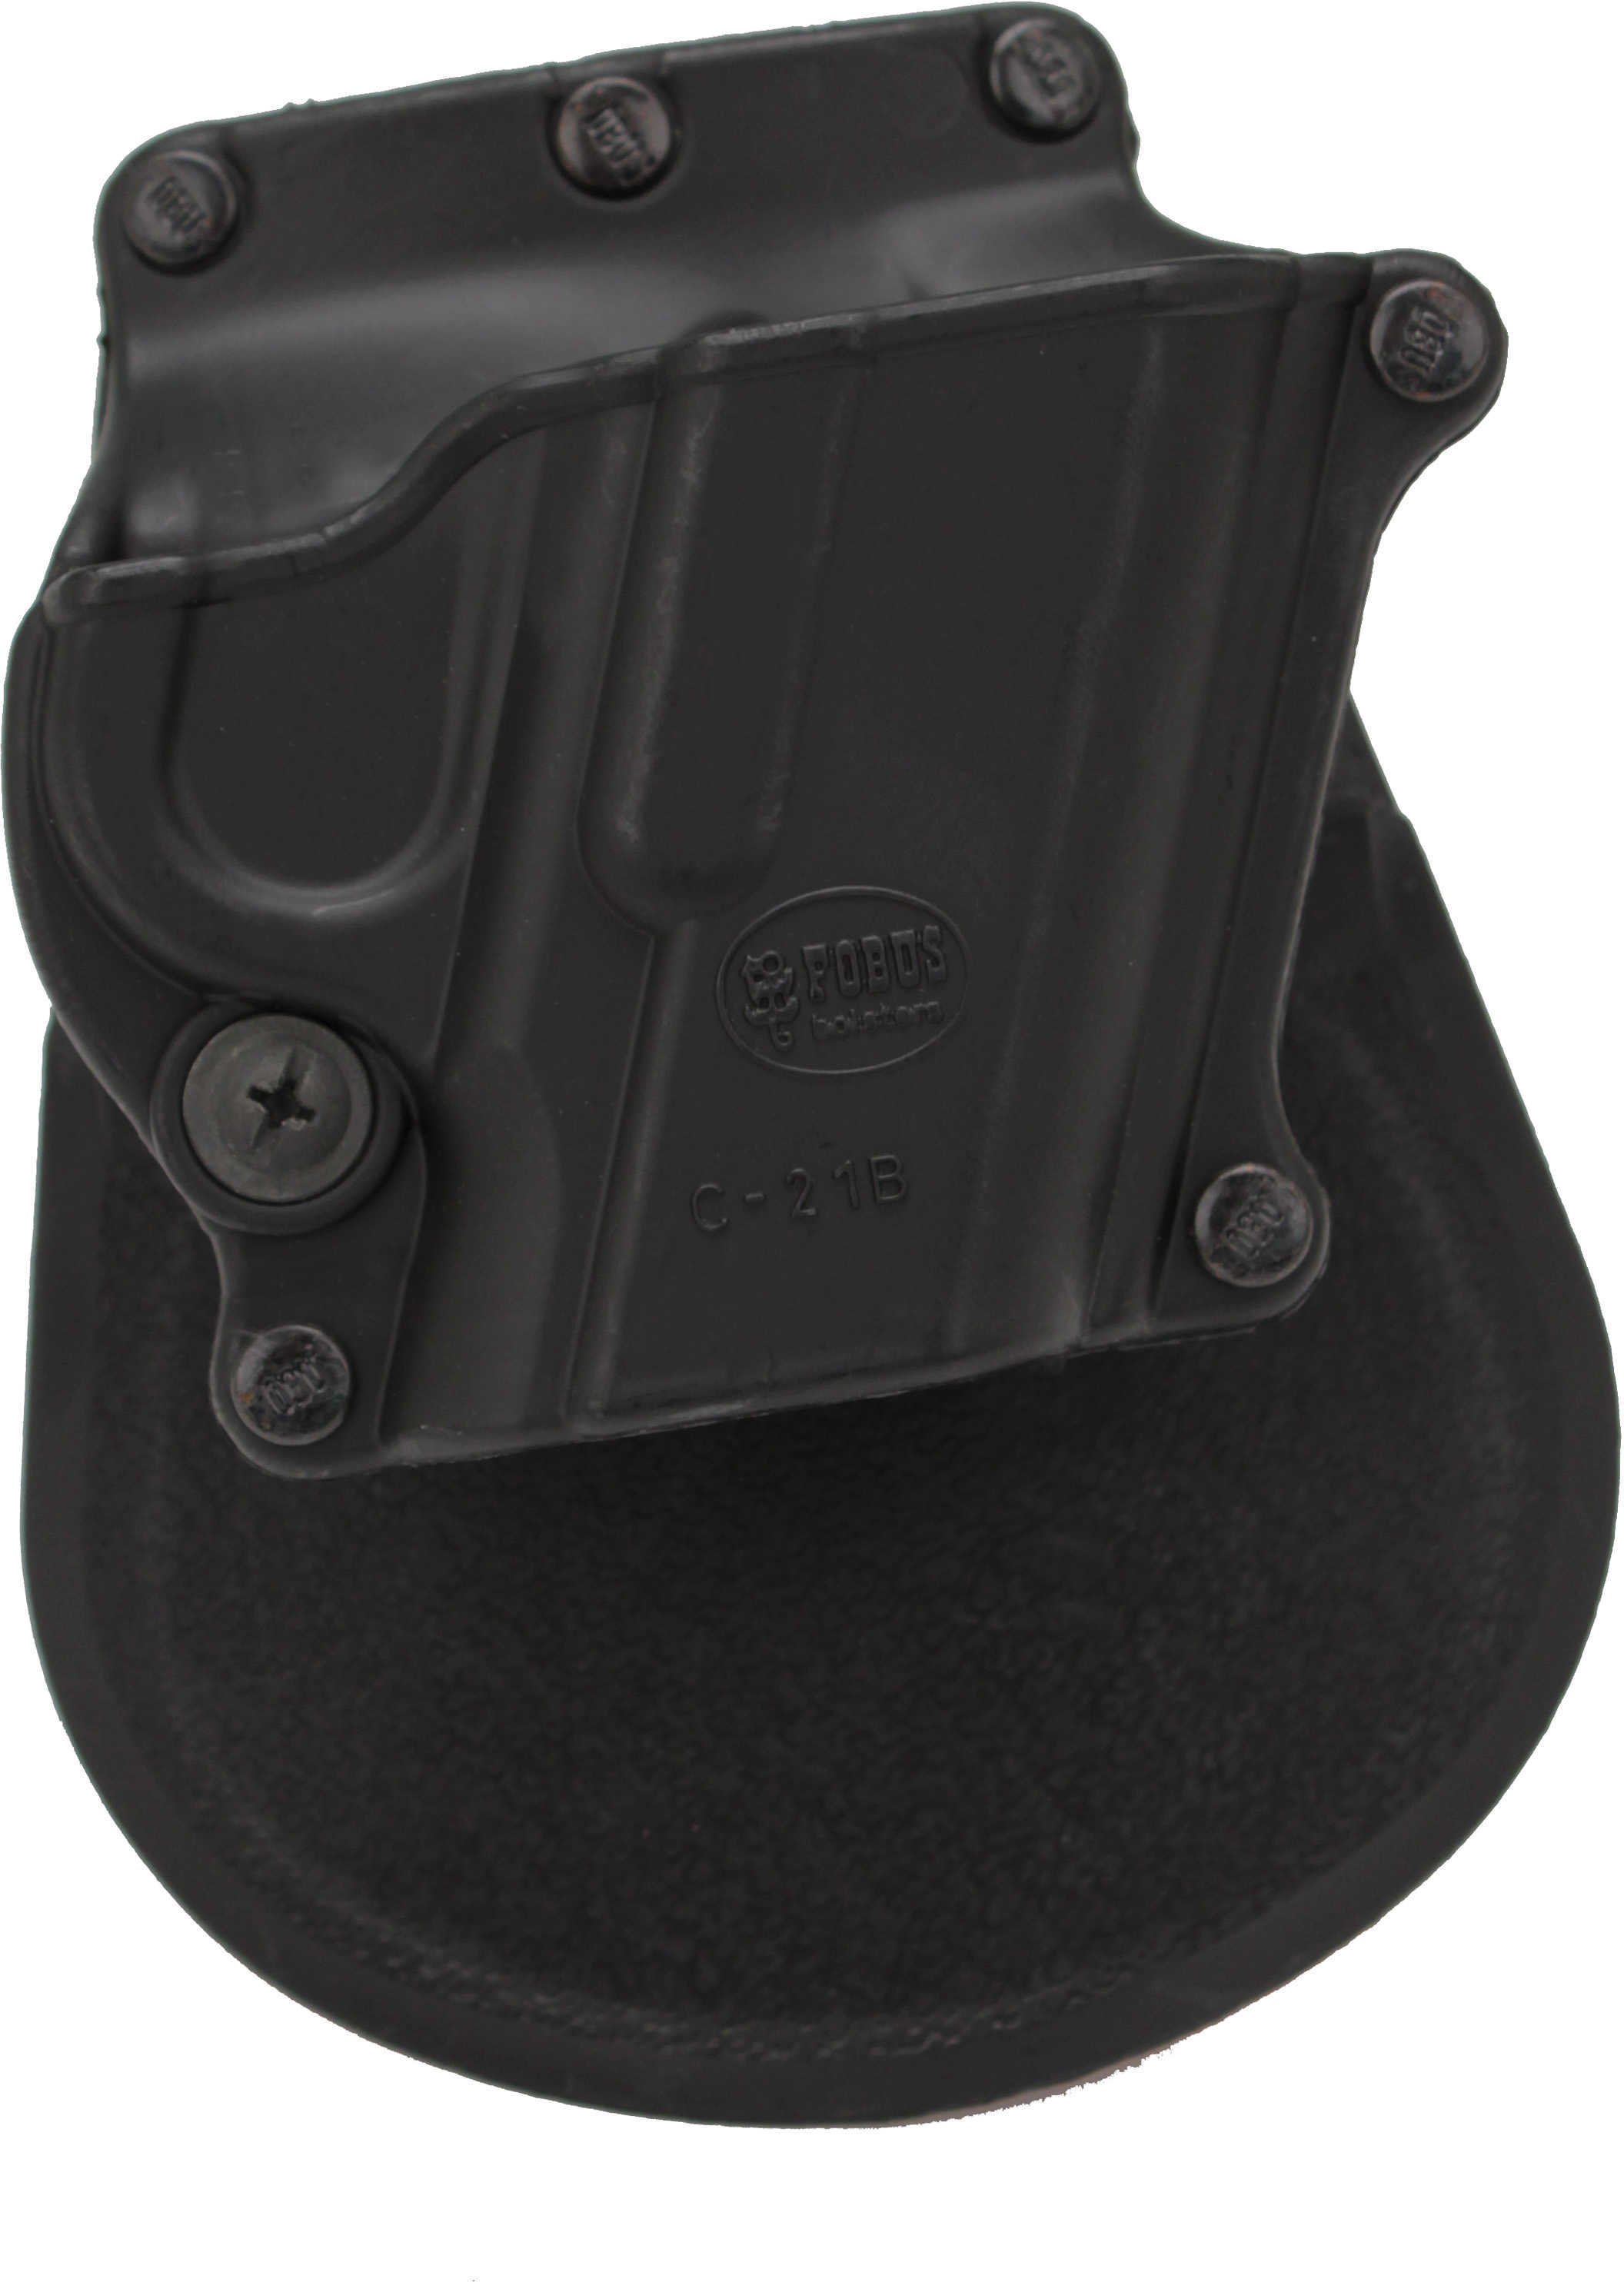 Fobus Compact Paddle Holster 1911 Style-Right Hand